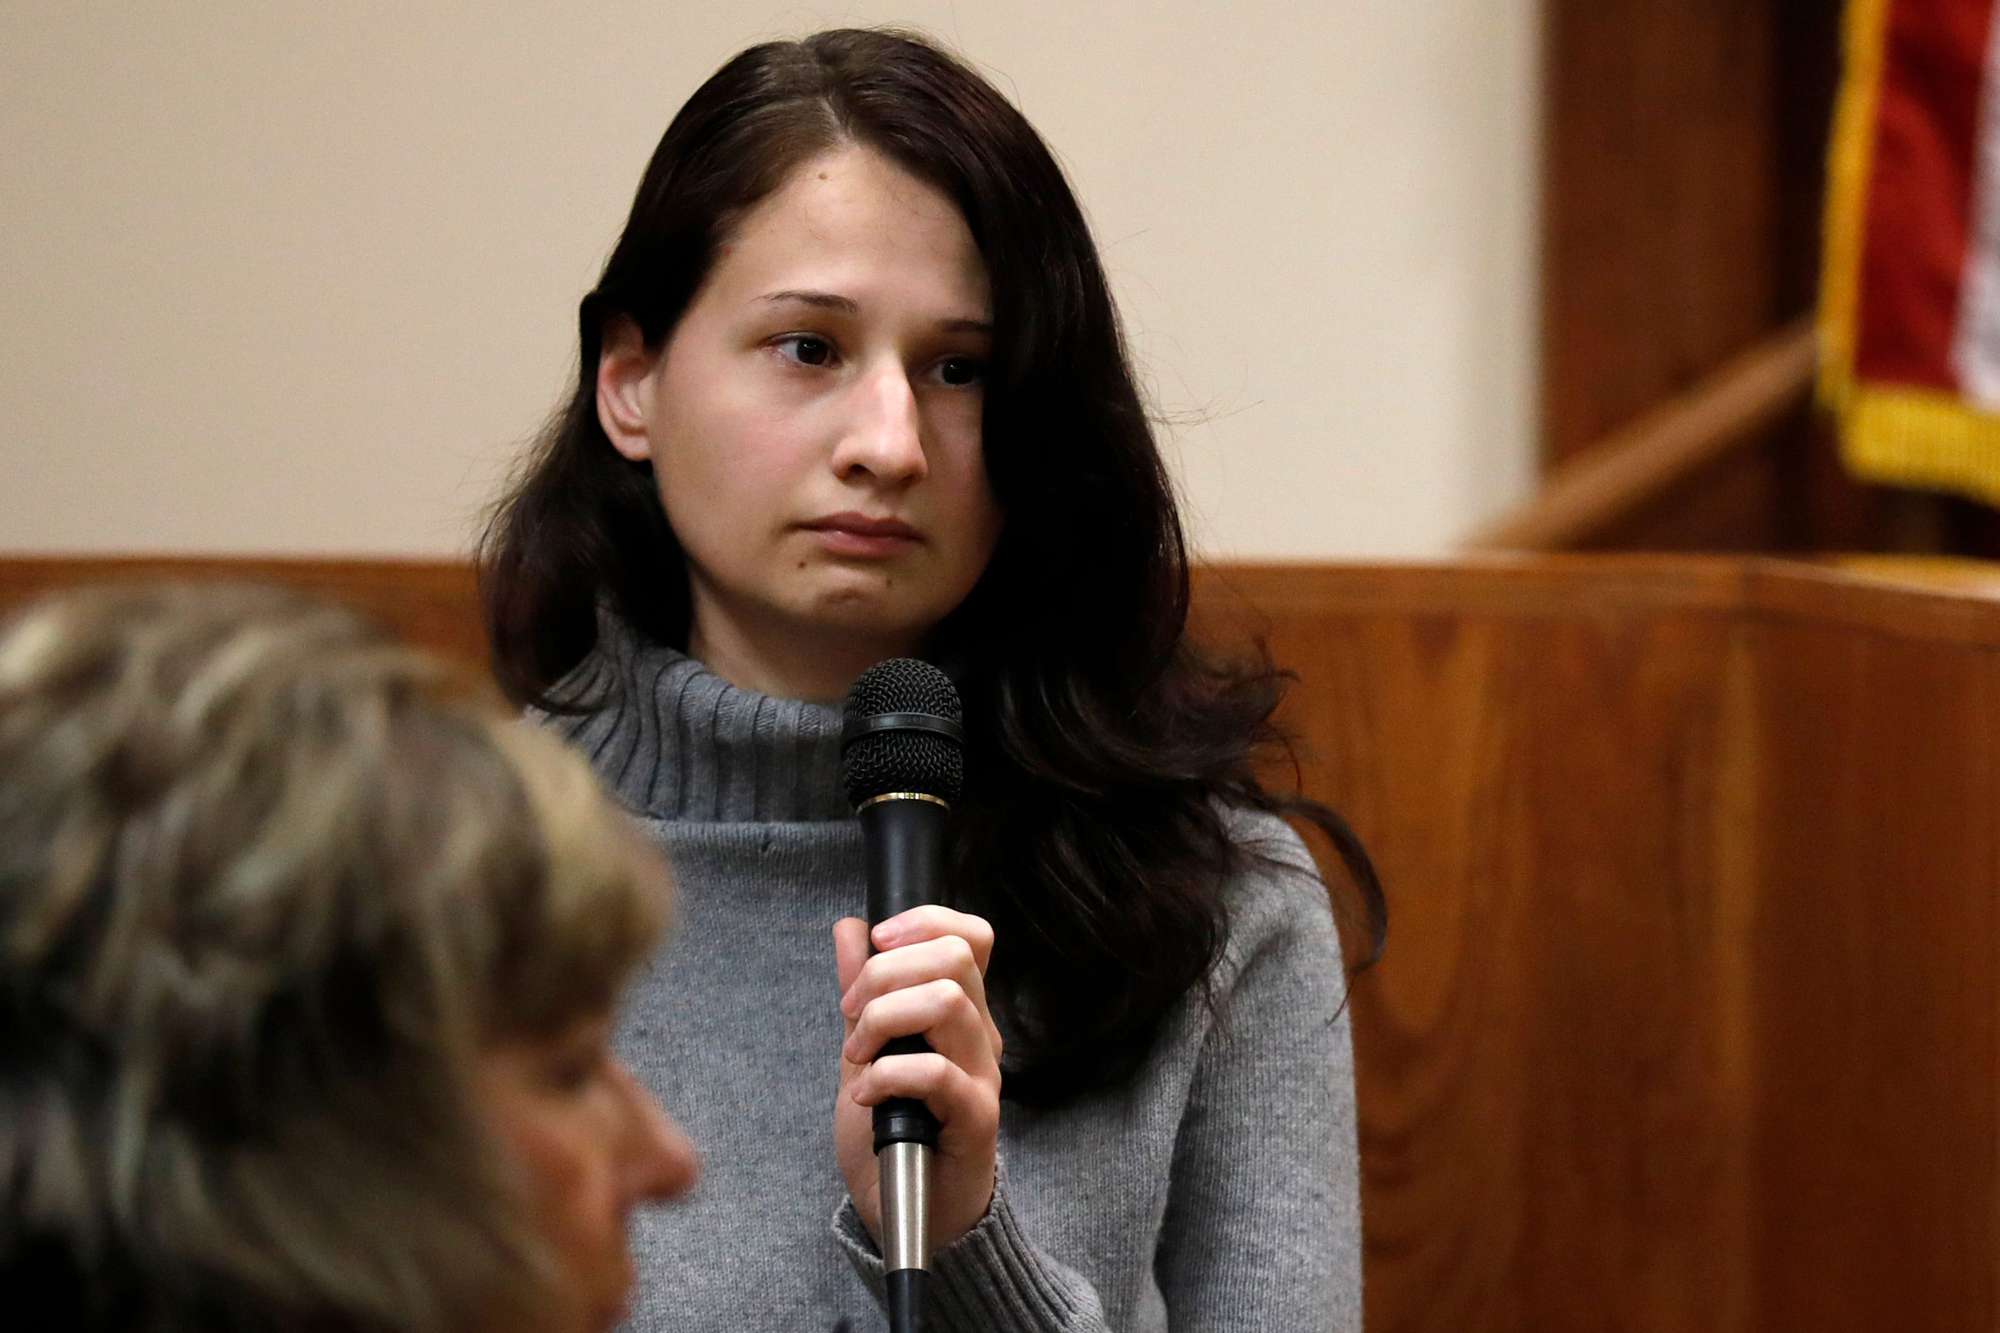 Springfield, MO, USA; Gypsy Blanchard takes the stand during the trial of her ex-boyfriend Nicholas Godejohn on Nov. 15, 2018.